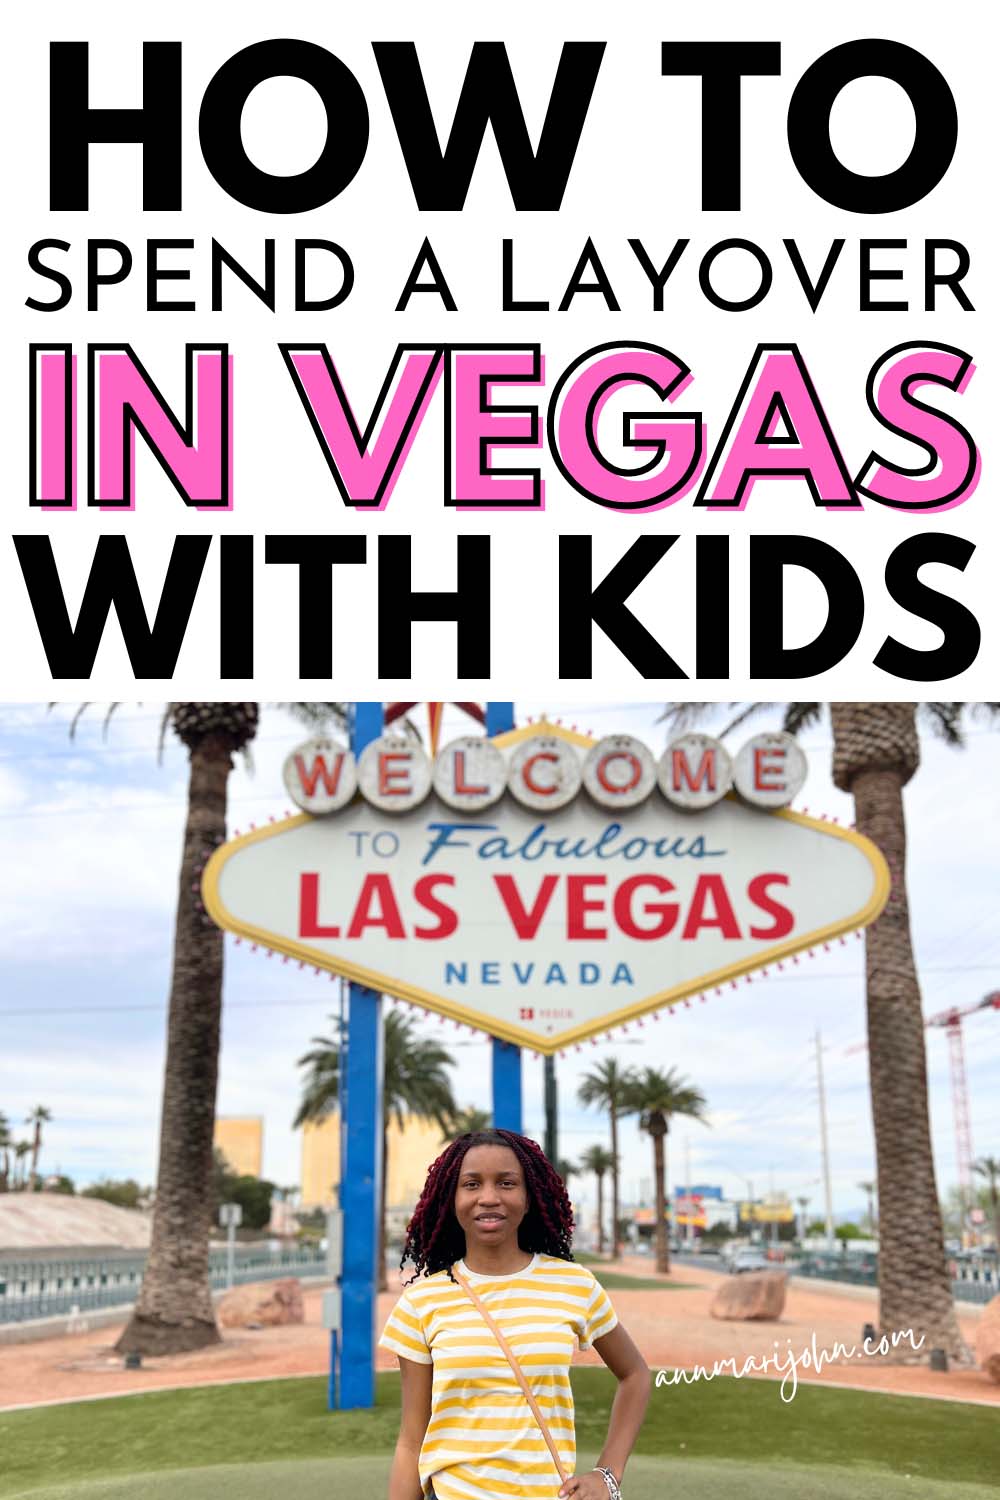 How to Spend a Layover in Vegas With Kids